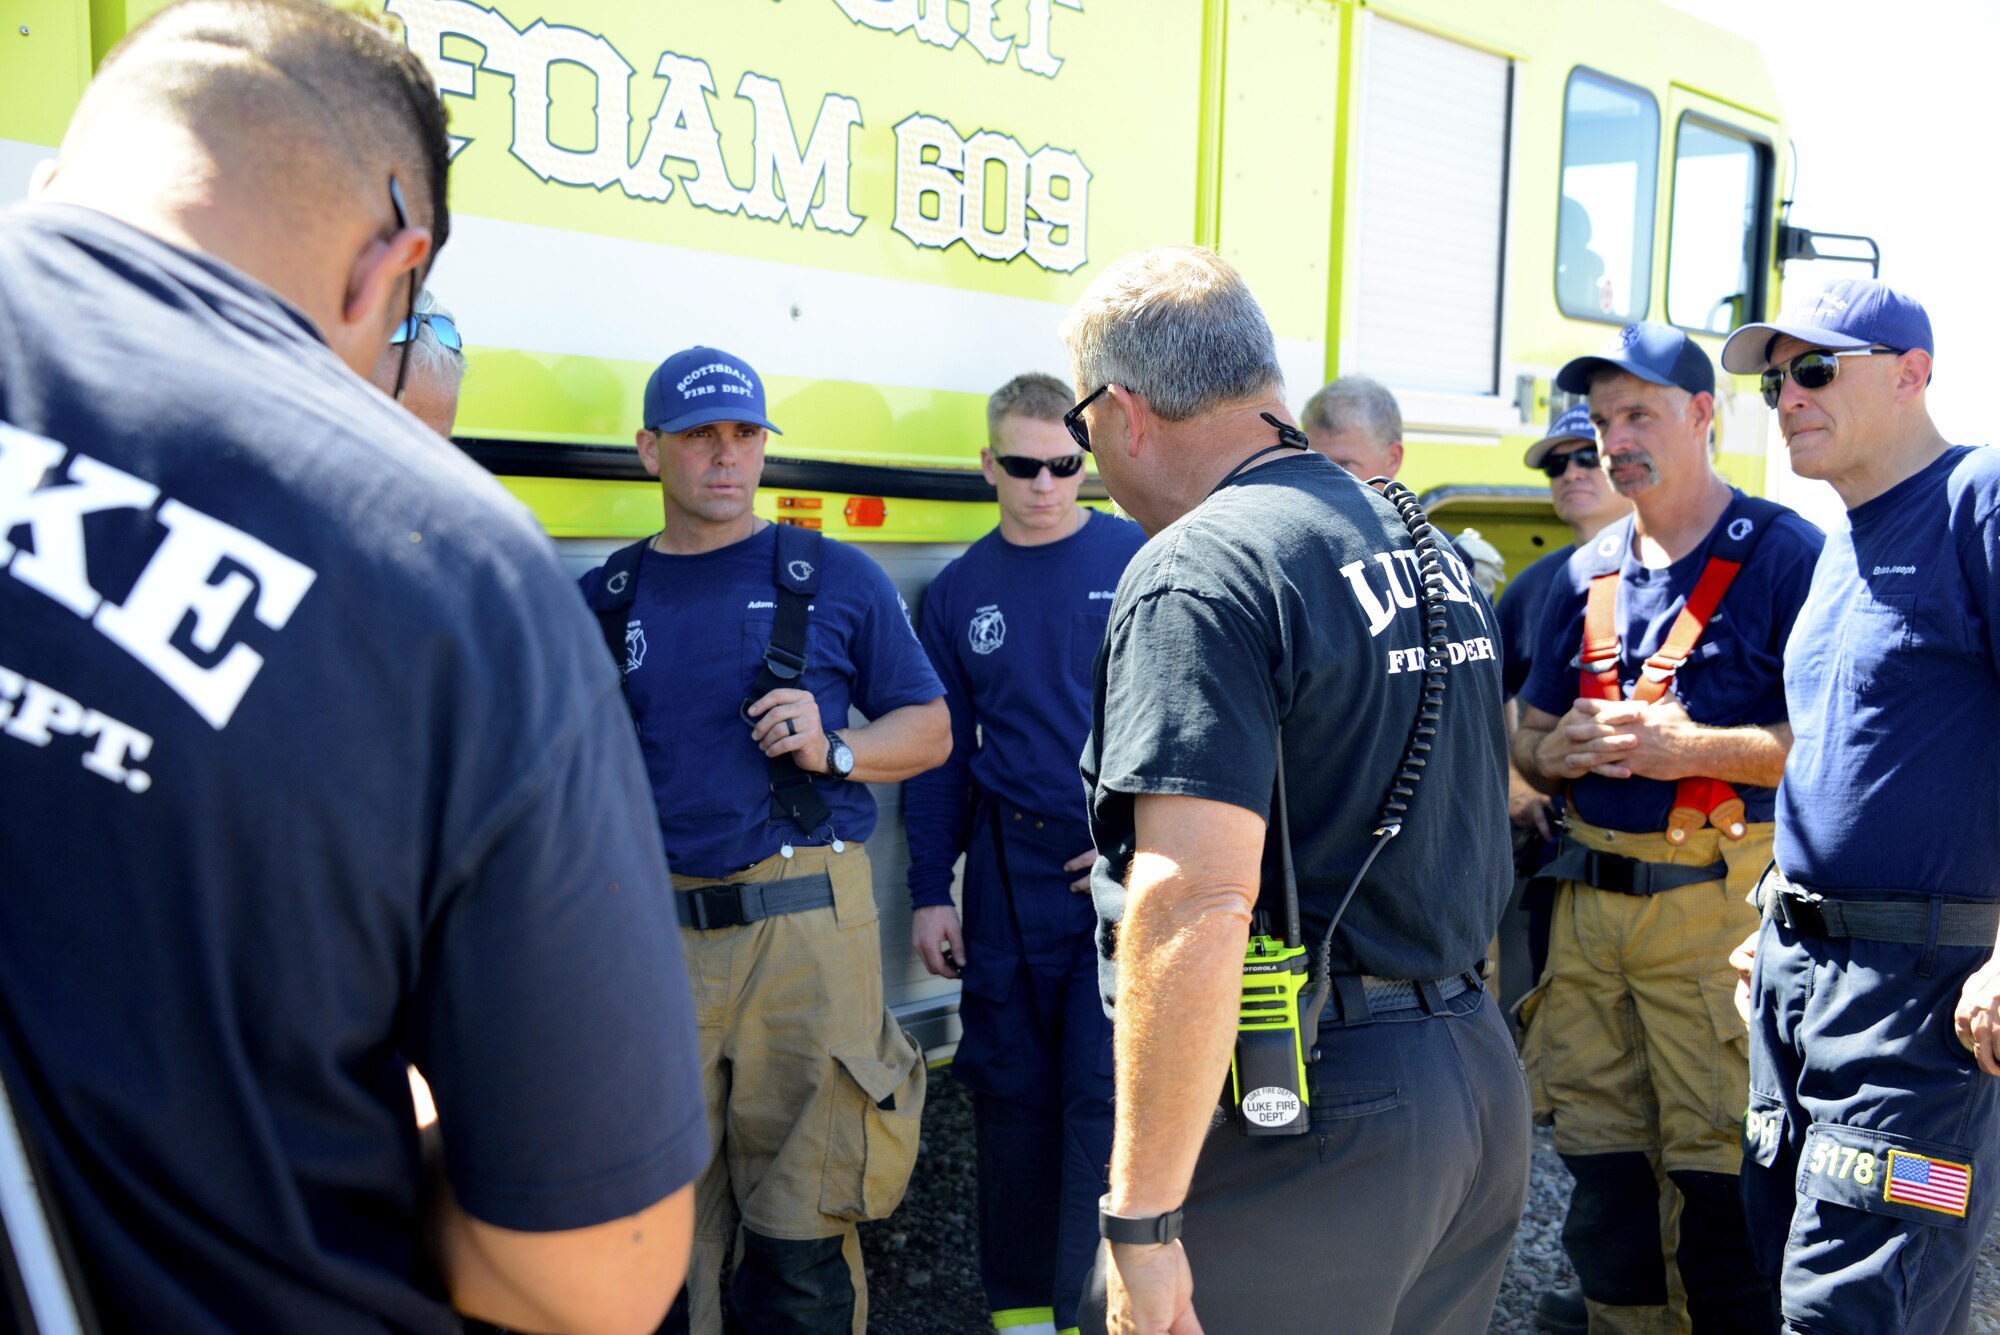 Steven Kinkade, 56th Civil Engineer Squadron assistant fire chief, speaks with Scottsdale firefighters after completing a training exercise Mar. 16, 2017 at Luke Air Force Base, Ariz. The objective of the exercise was to control the means of egress and evacuate victims while stabilizing the fire.(U.S. Air Force photo by Senior Airman Devante Williams)  